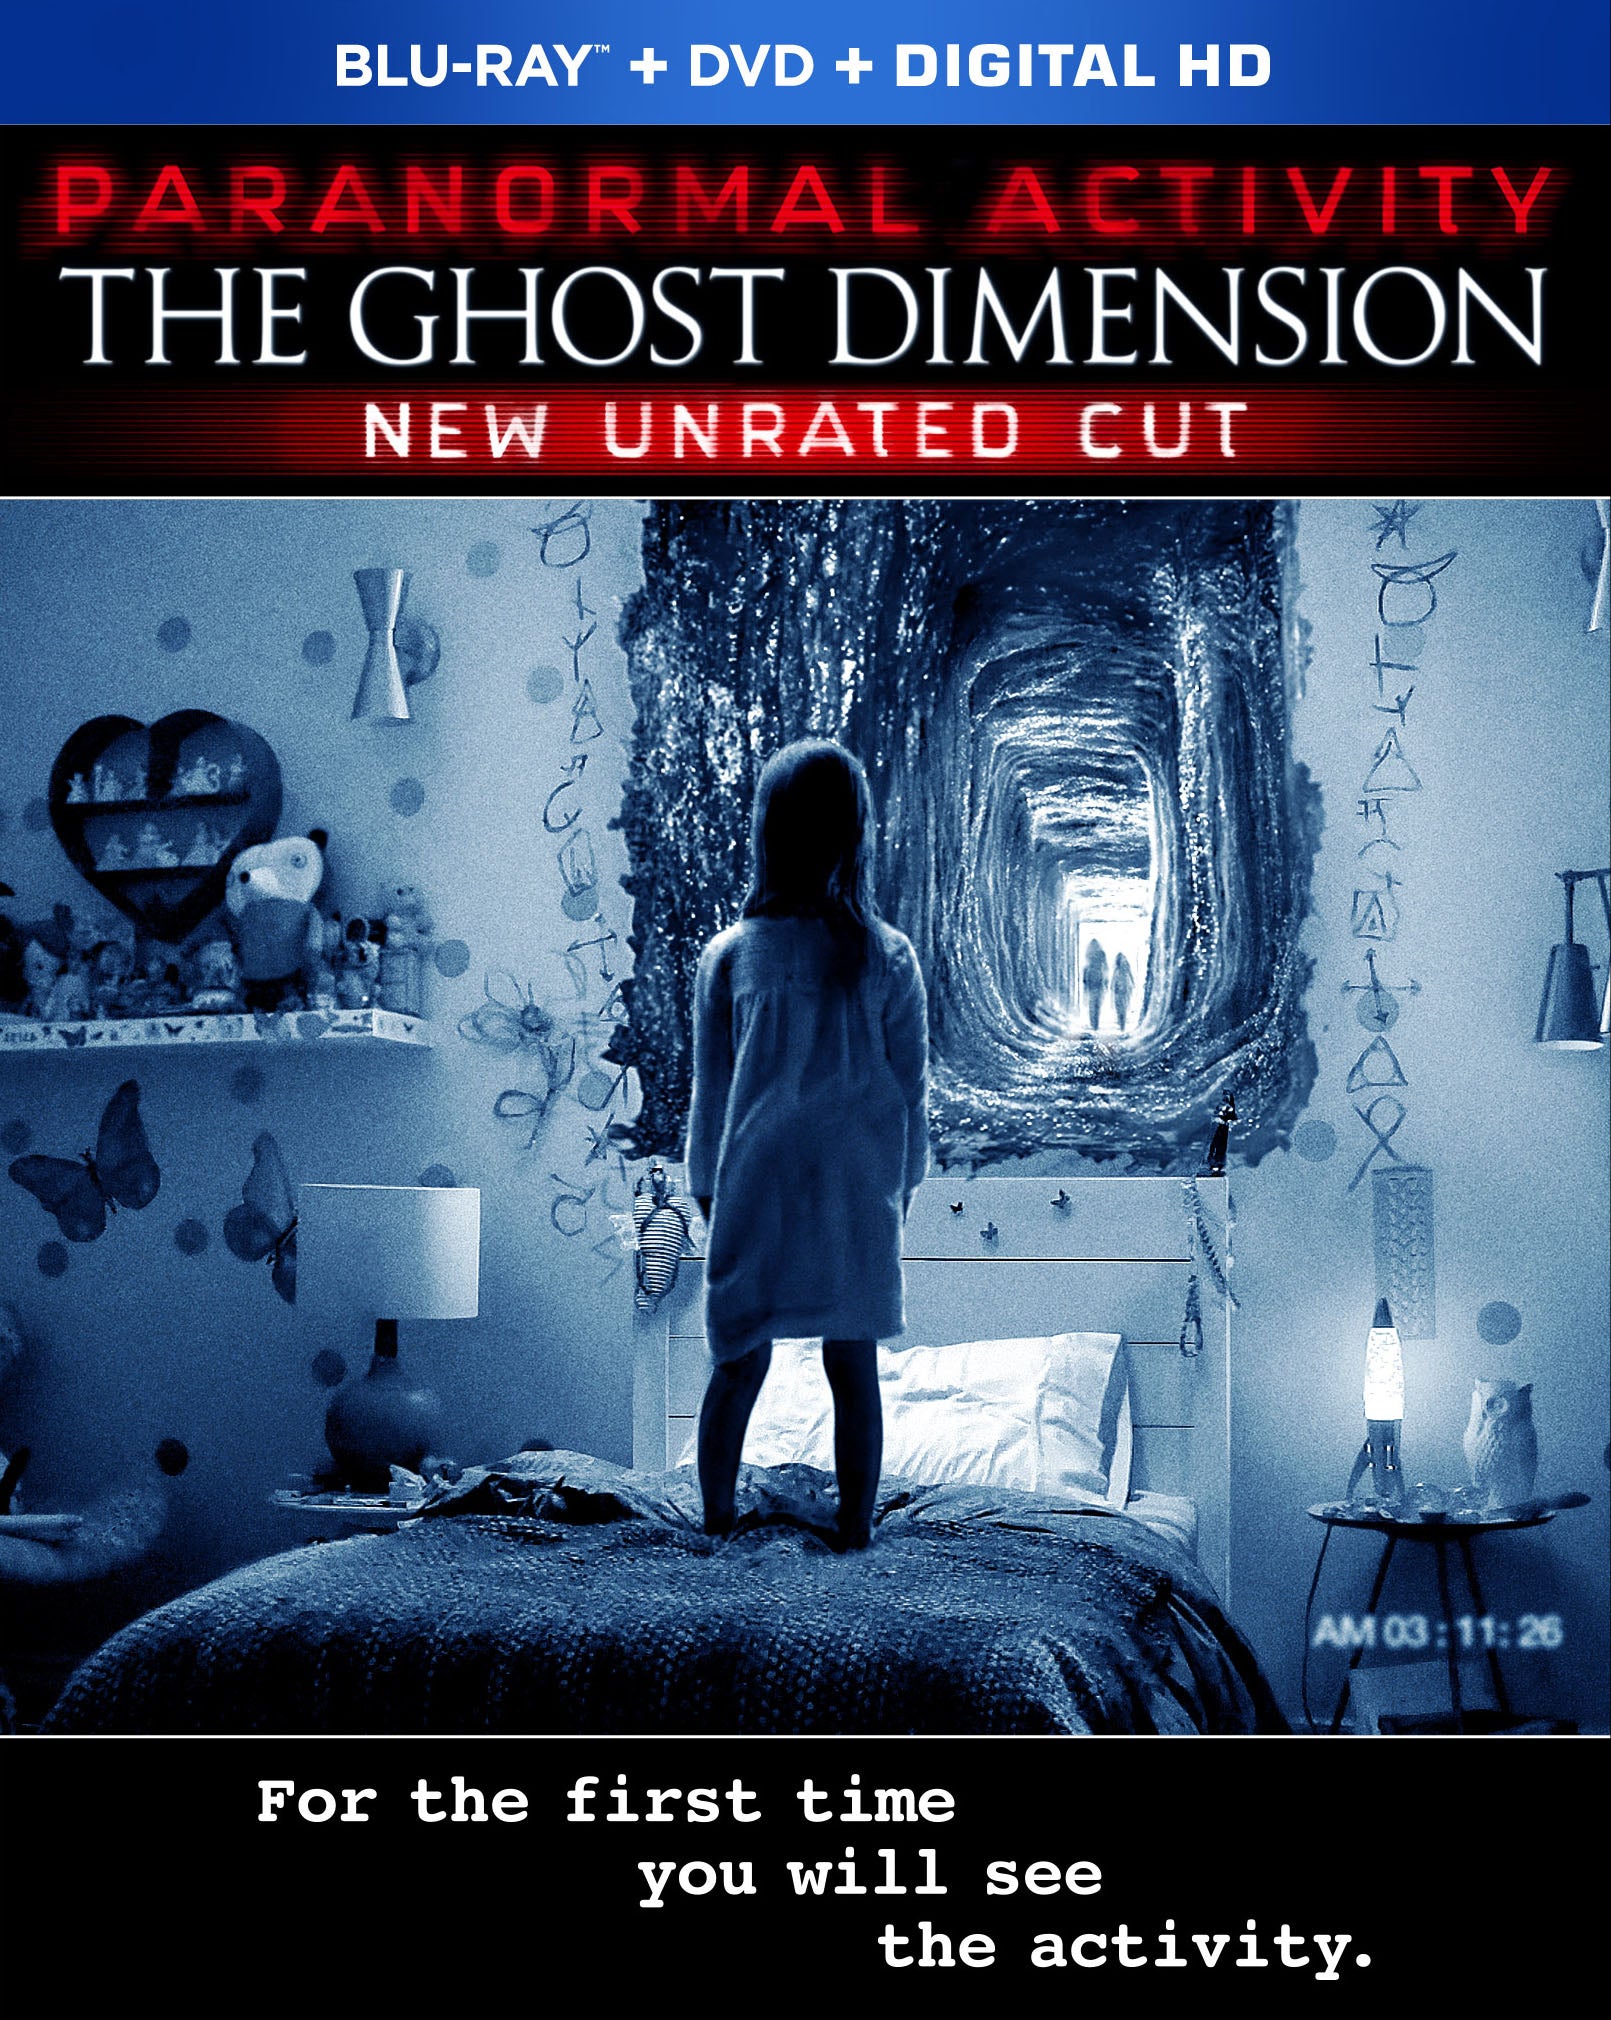 Paranormal Activity: The Ghost Dimension [Blu-ray/DVD] cover art